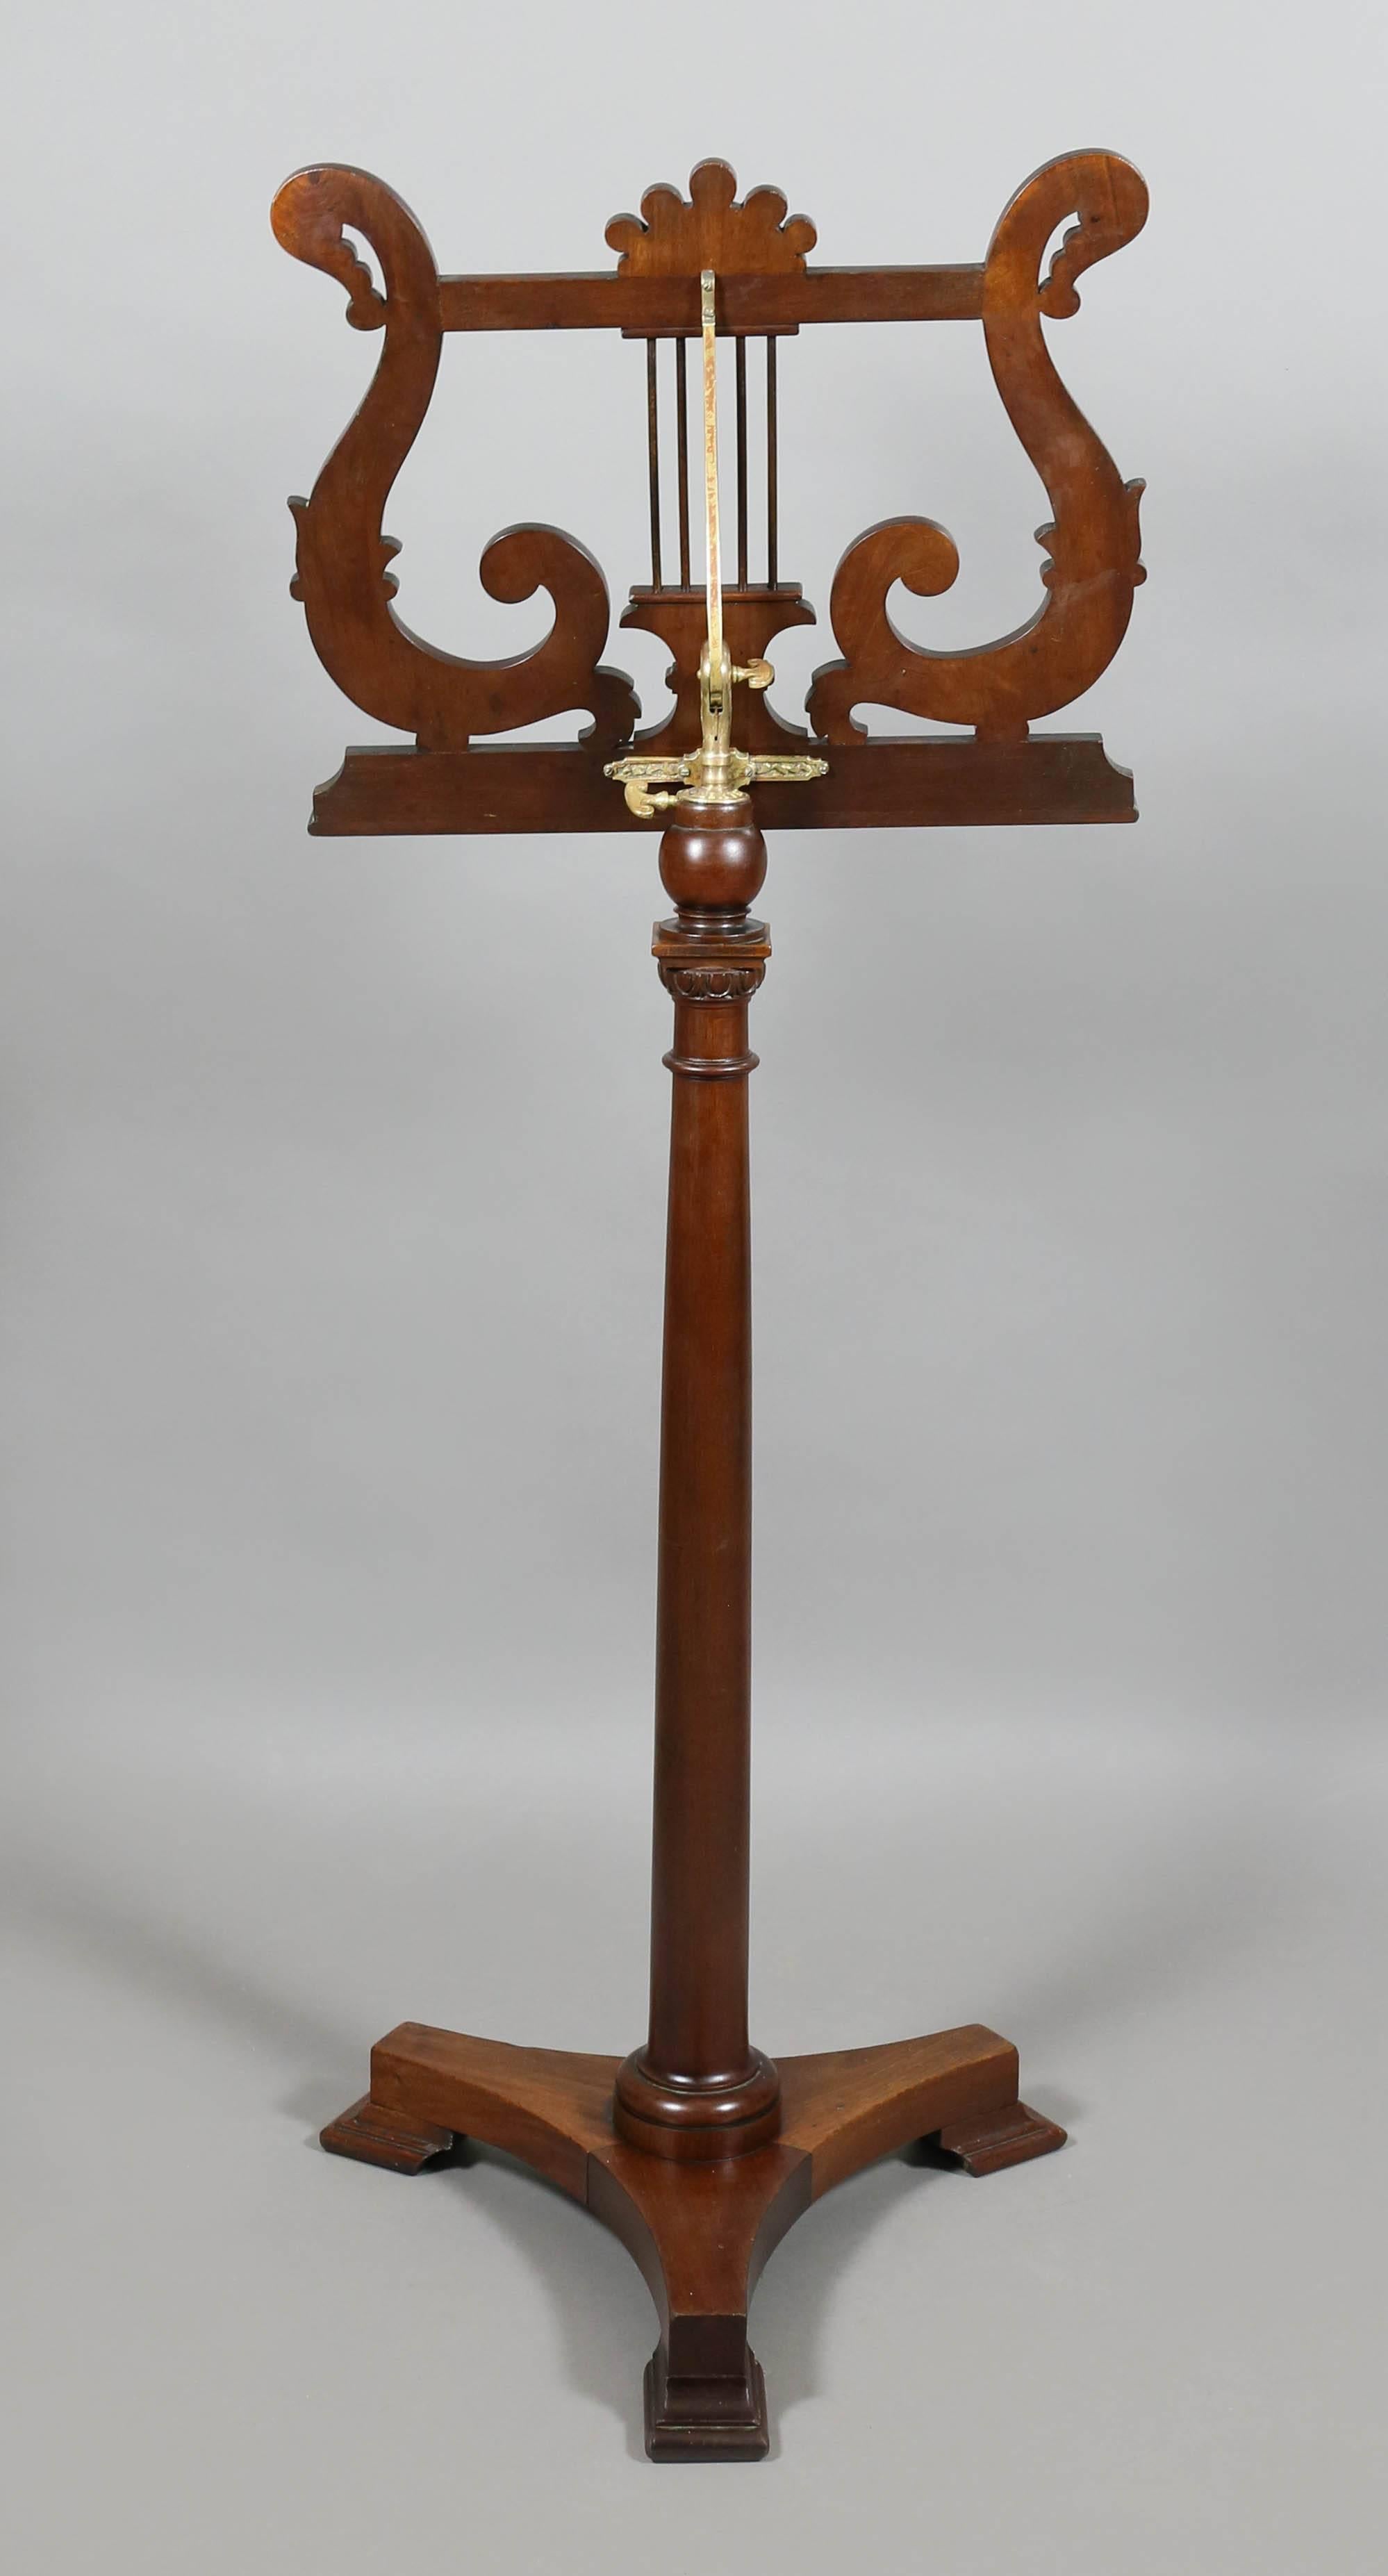 Neoclassical Revival American Classical Revival Mahogany Music Stand